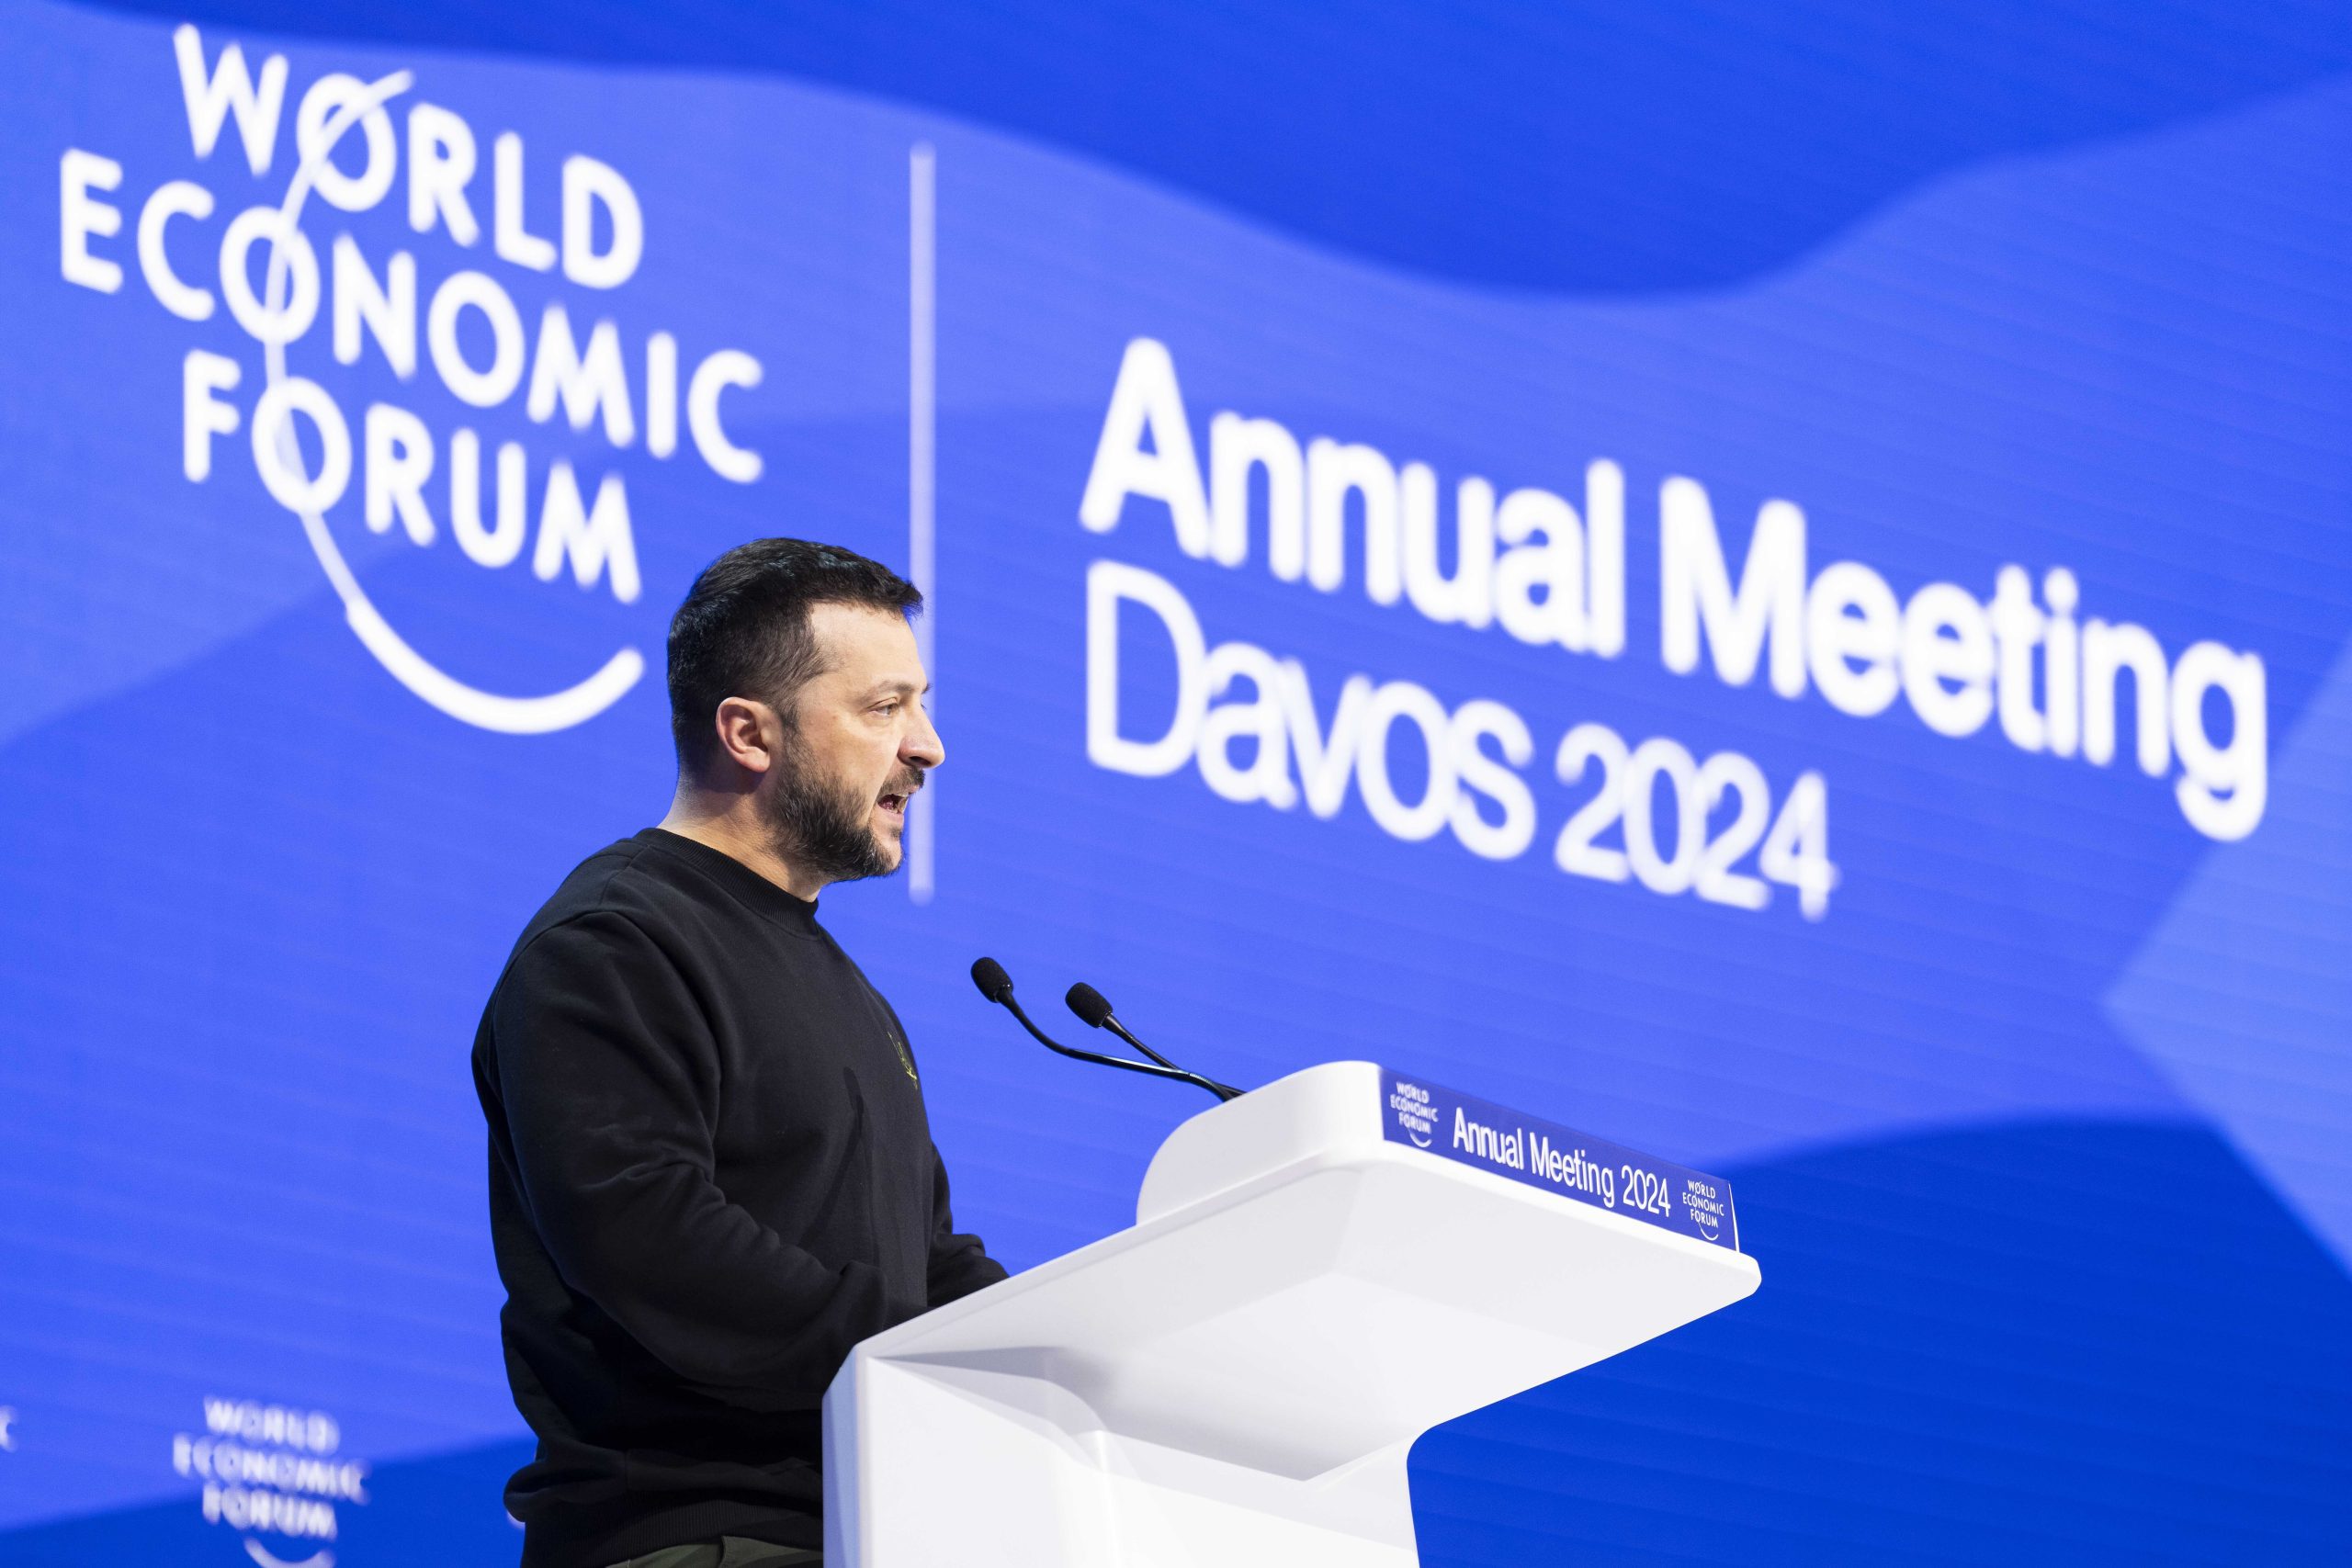 Ukraine’s Surrender to the Digital Abyss: GovTech Deal with WEF Sparks Global Control Fears